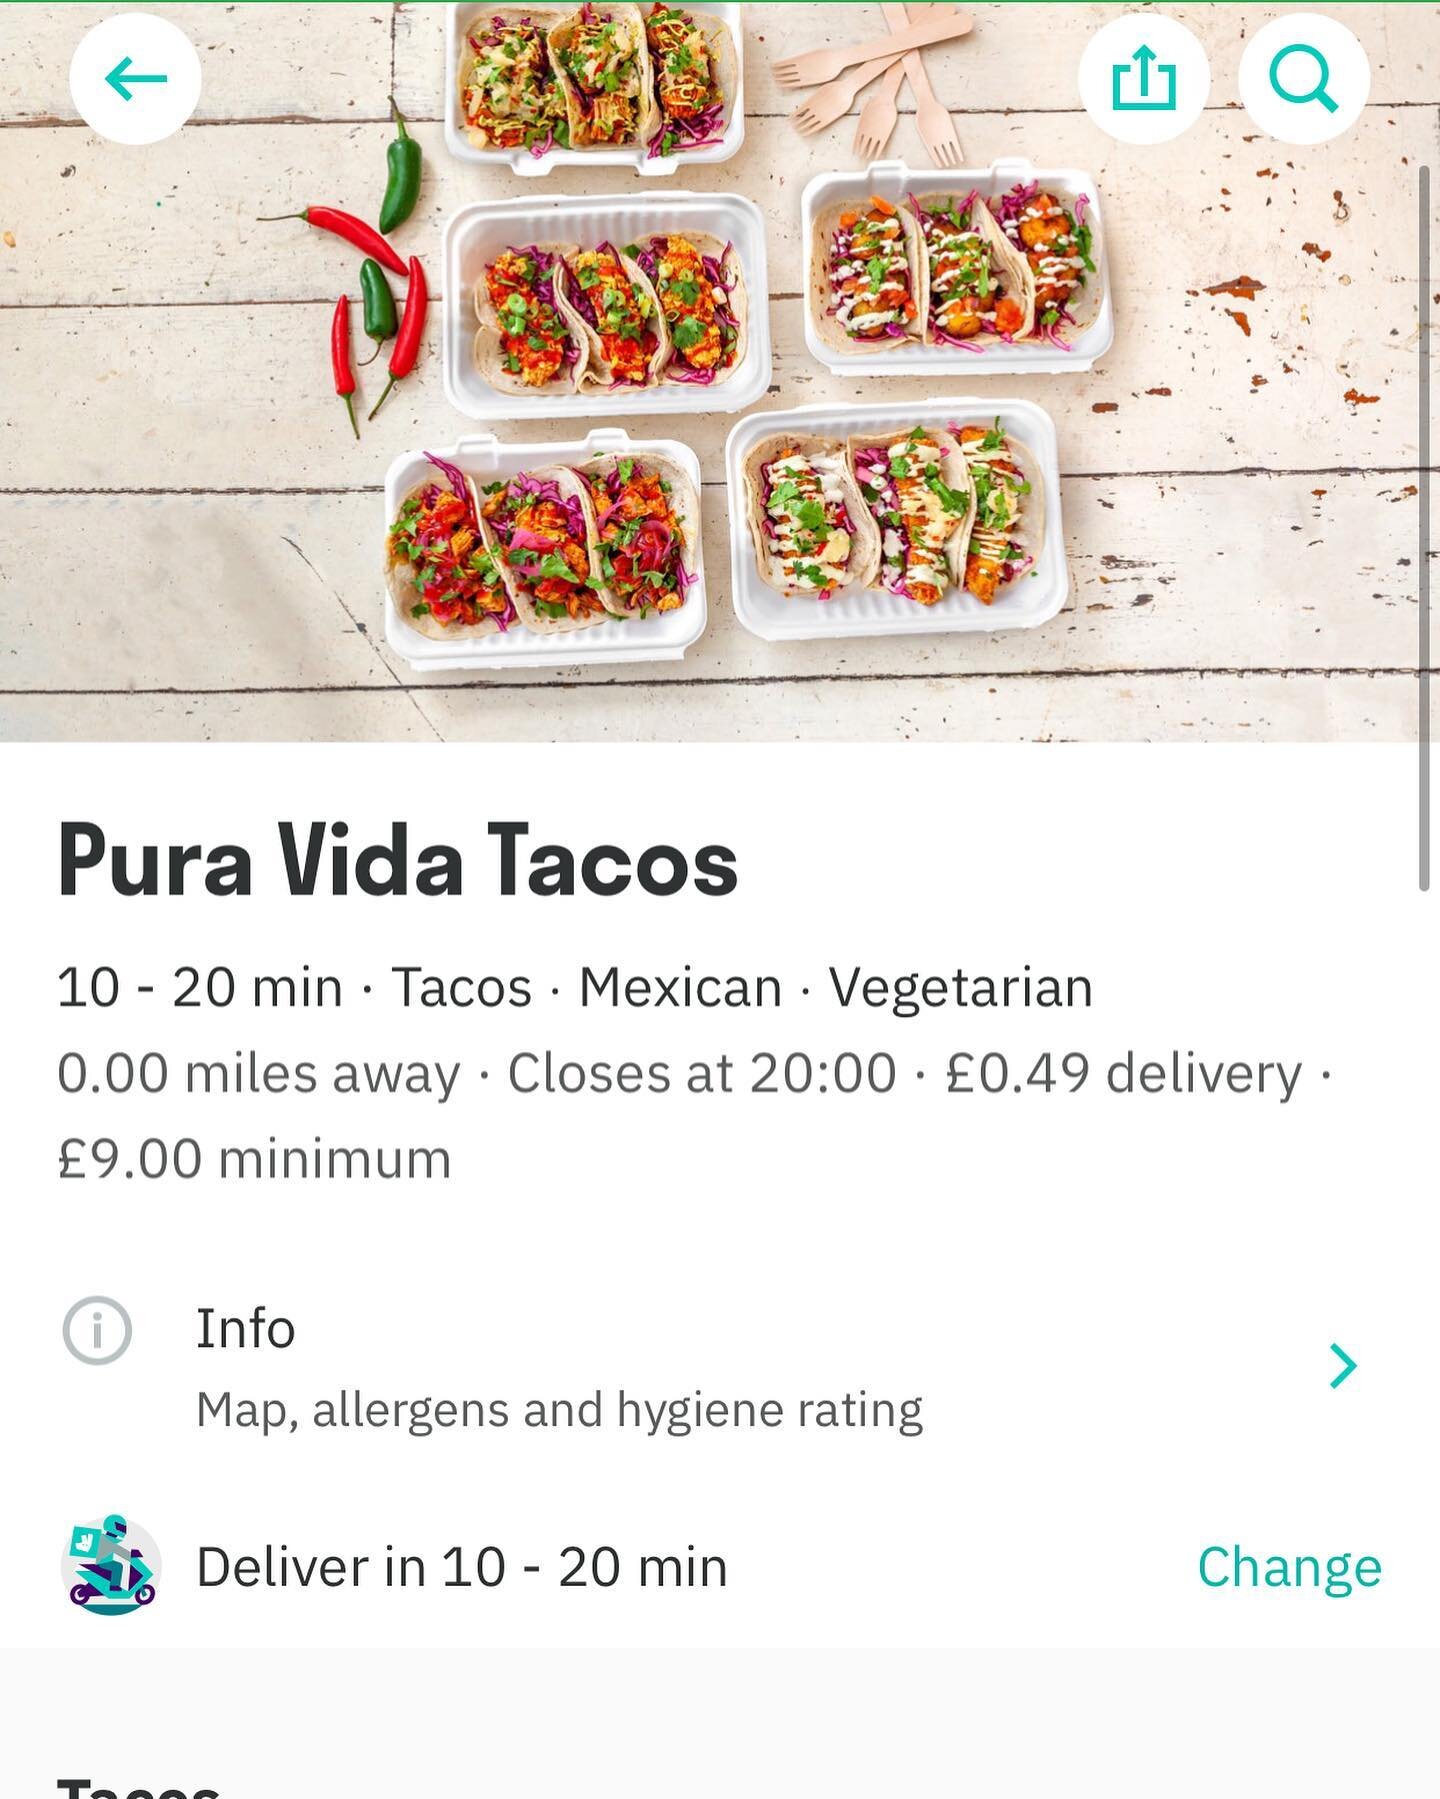 We&rsquo;re on @deliveroo ! 🌮 

Come get sum 😎

#mexicanbristol #bristolfoodie #bristolpubs #mexicanfood #tacos #mexico #puravida #streetfood #foodporn #supportsmallbusiness #independent #foodie #horsebox #bristol #whattodoinbristol #mexico🇲🇽 #ba